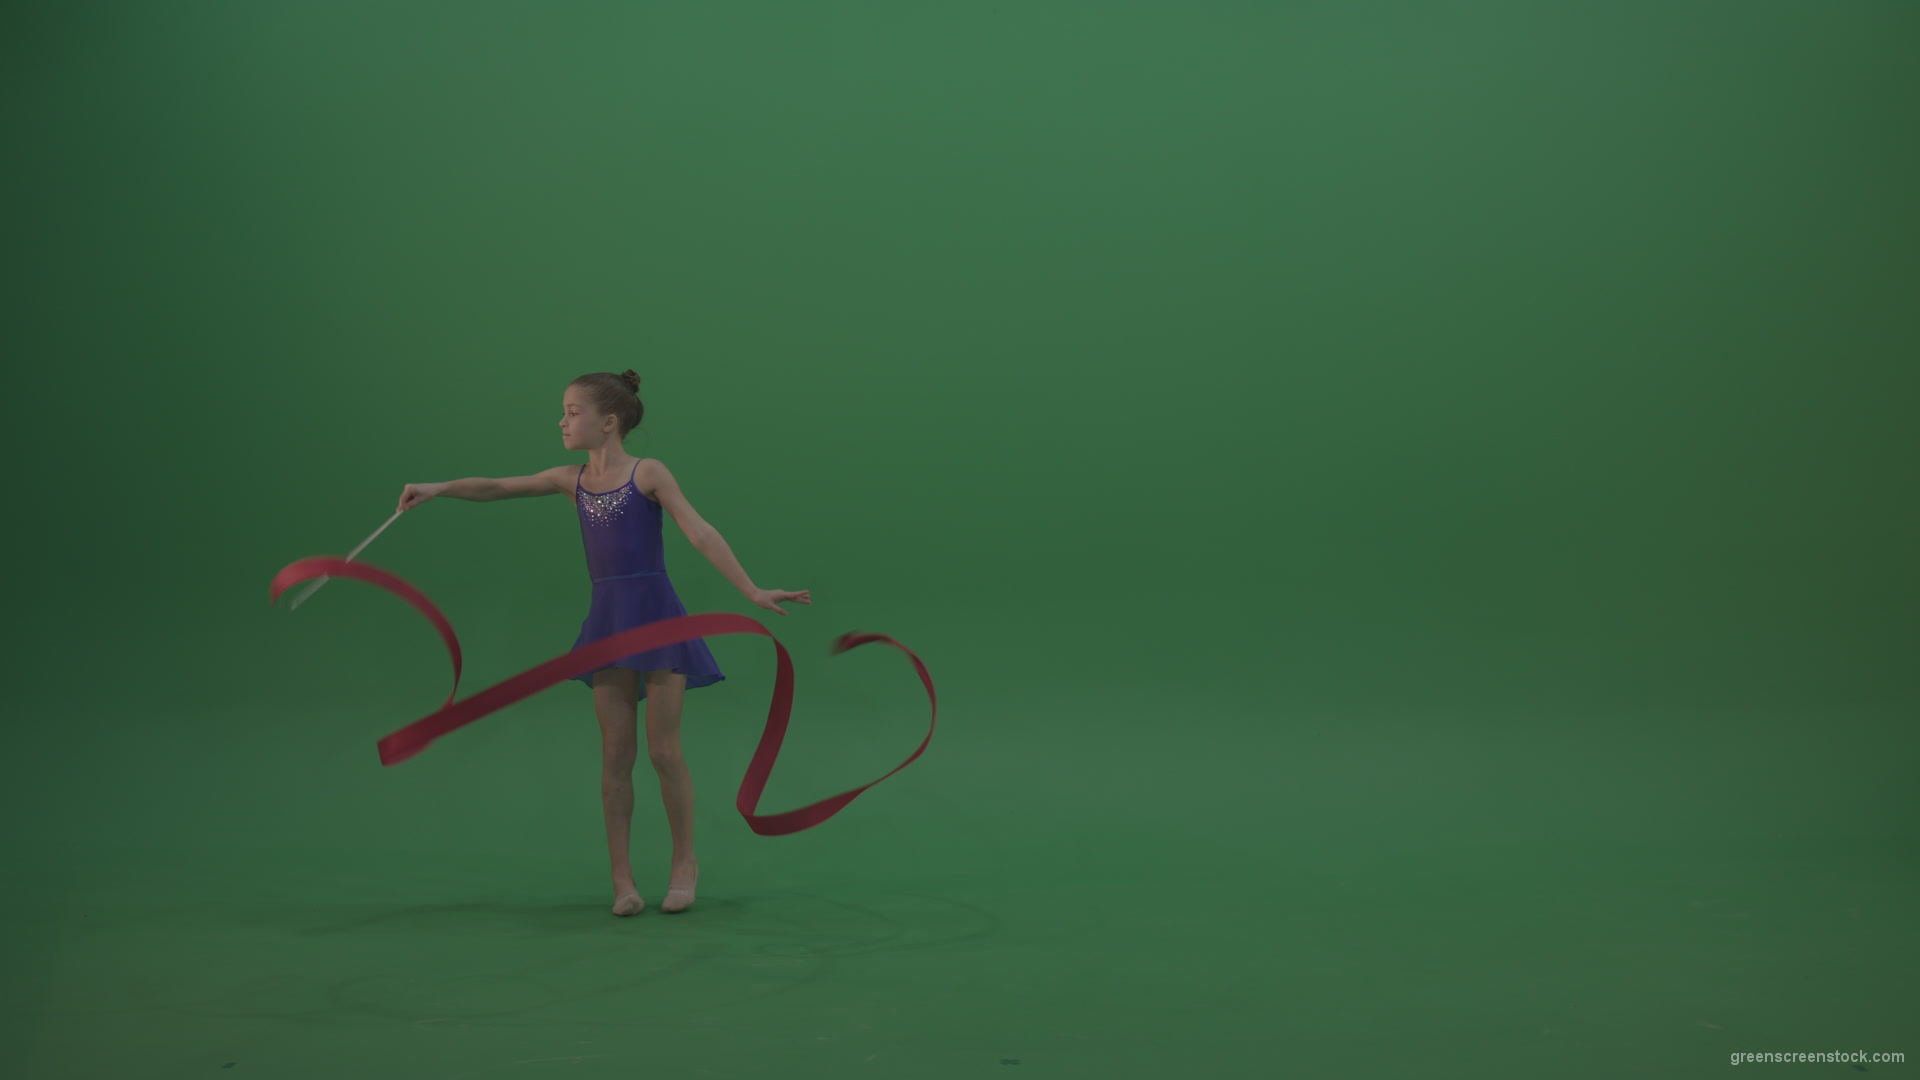 Young_Female_Acrobat_Gymnast_Performing_Acro_Dance_Using_Red_Long_Ribbon_On_Green_Screen_Wall_Chroma_Key_Background_006 Green Screen Stock